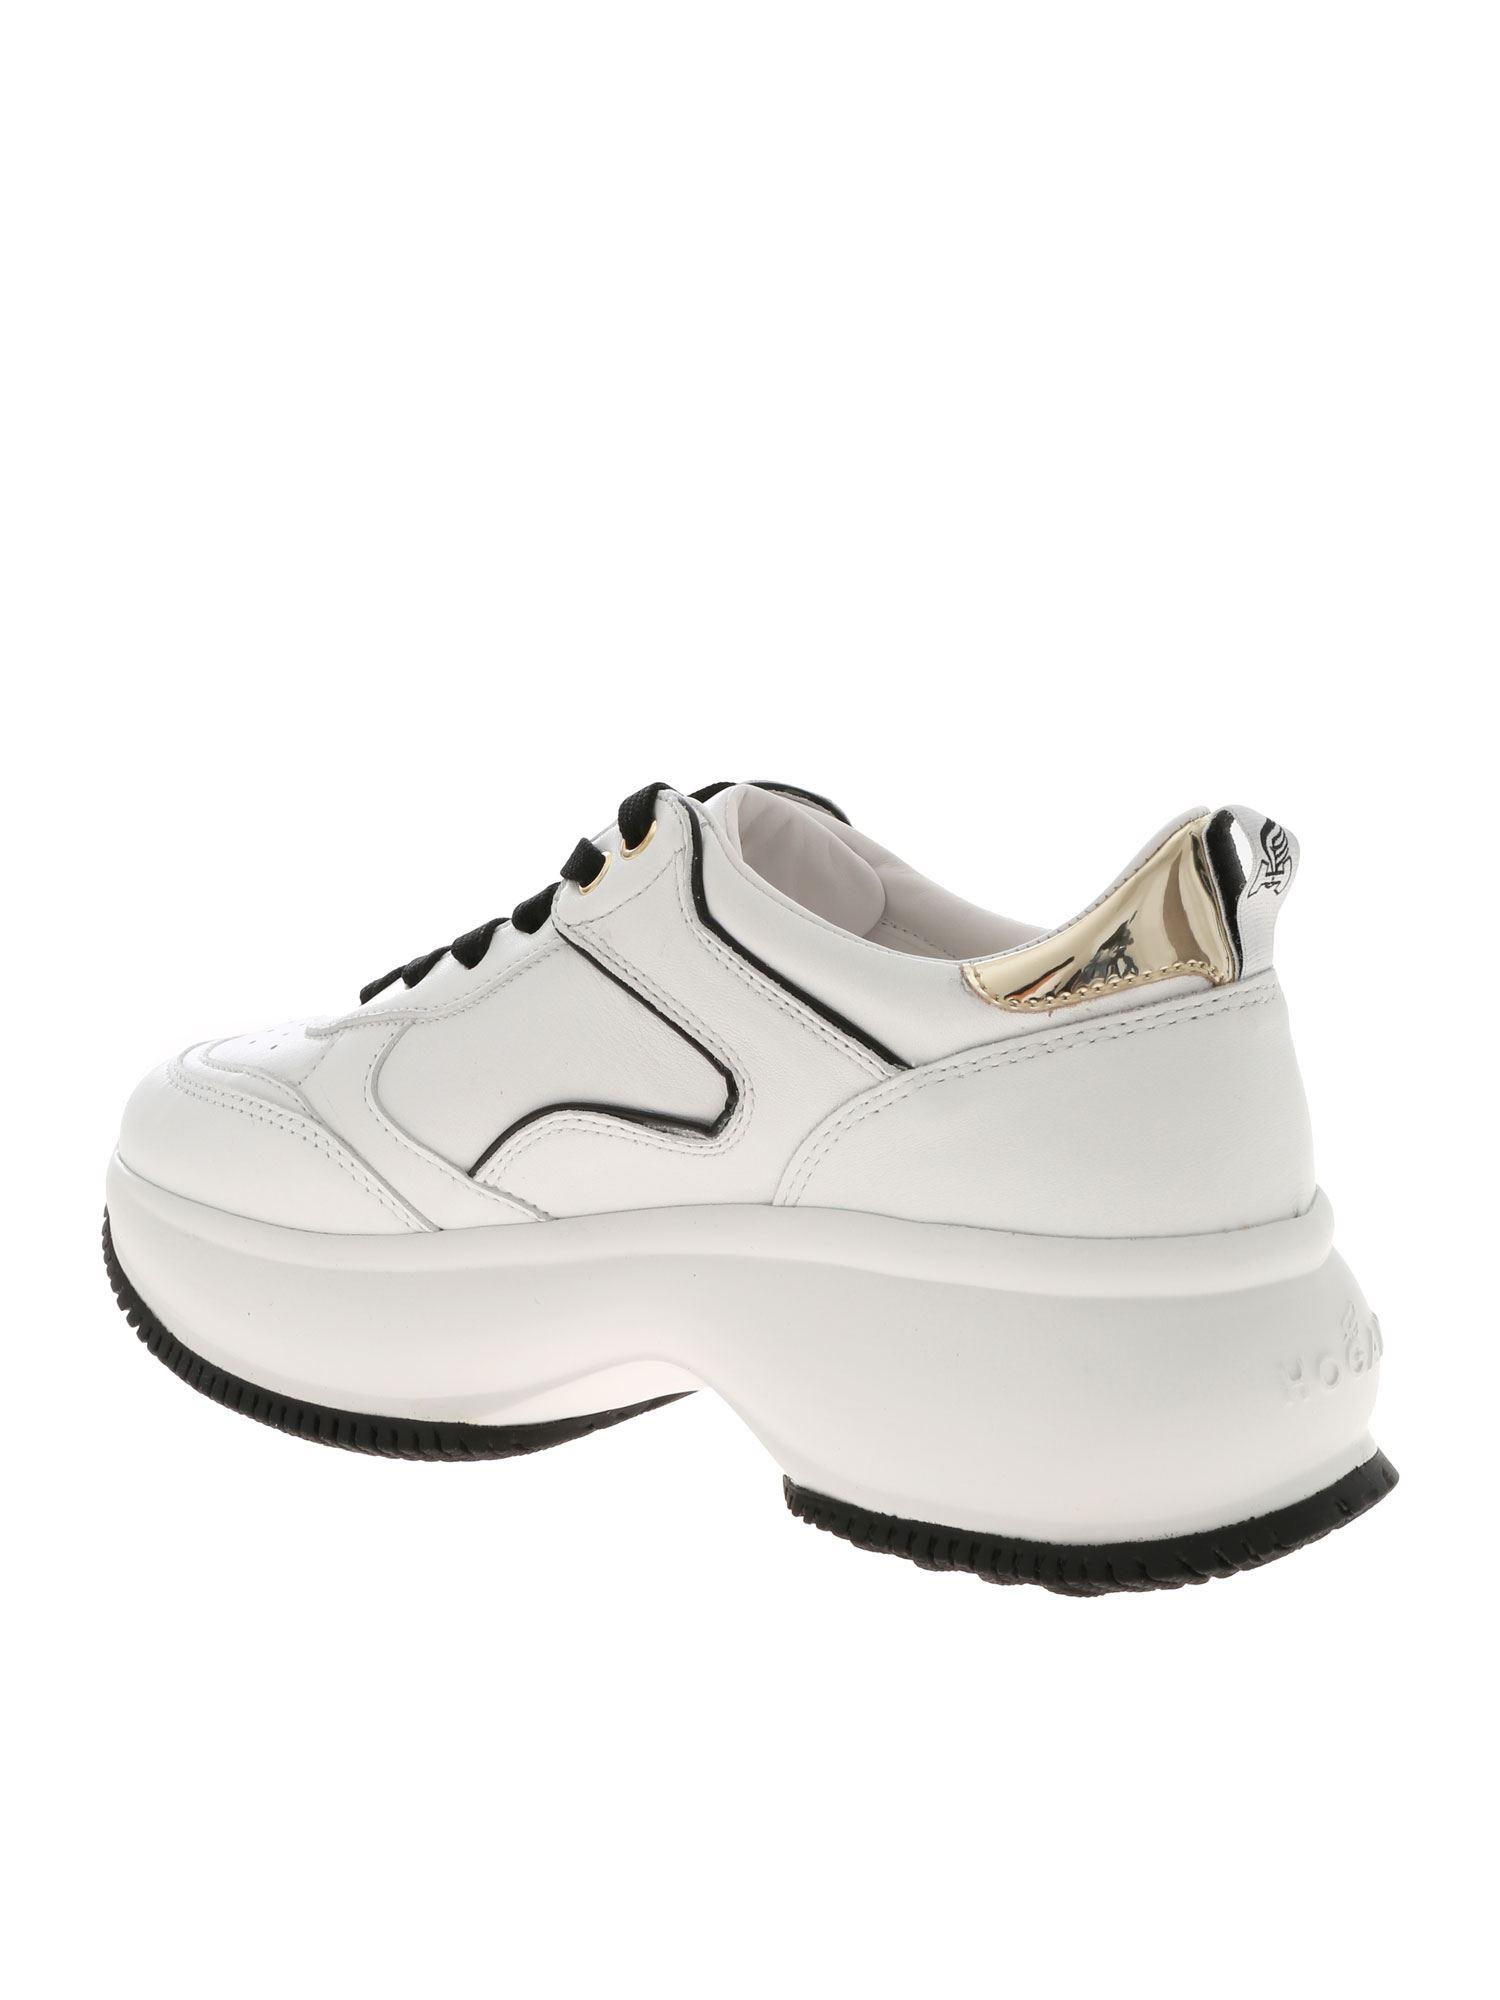 Hogan Leather Maxi I Active Sneakers In White - Lyst